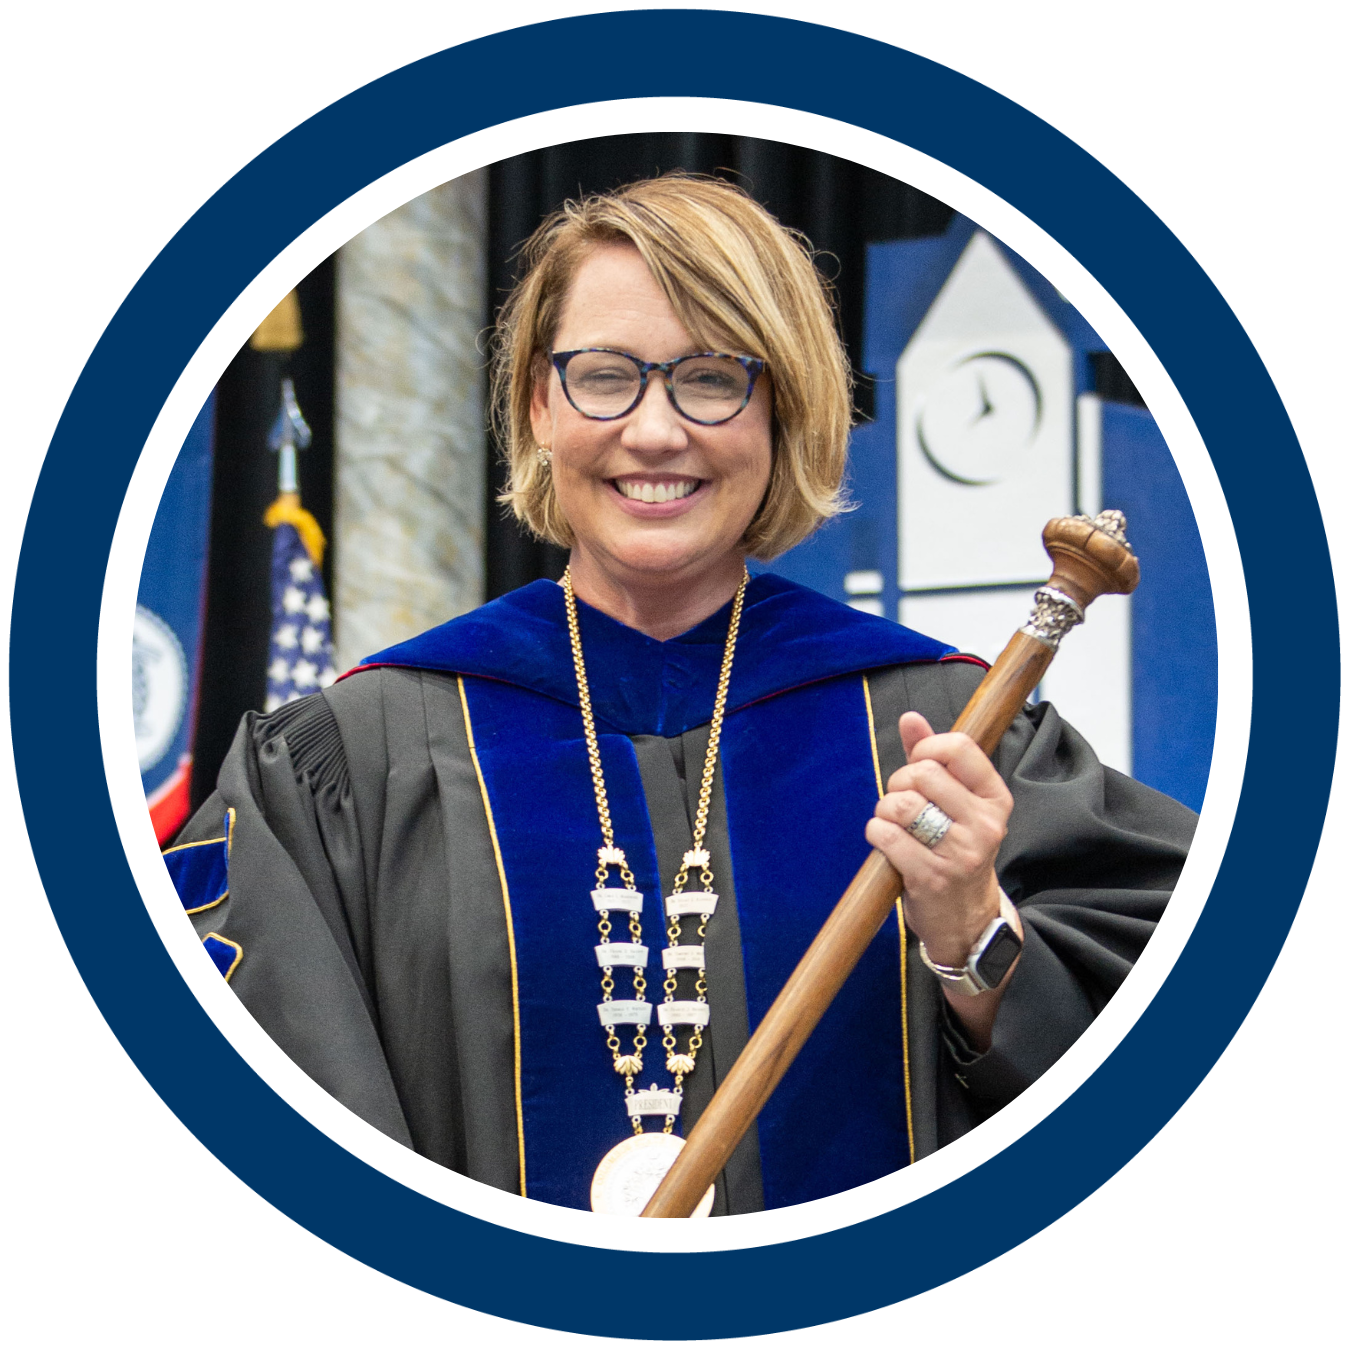 Picture of Dr. Rayfield in her academic regalia wearing the presidential medallion and holding the university mace